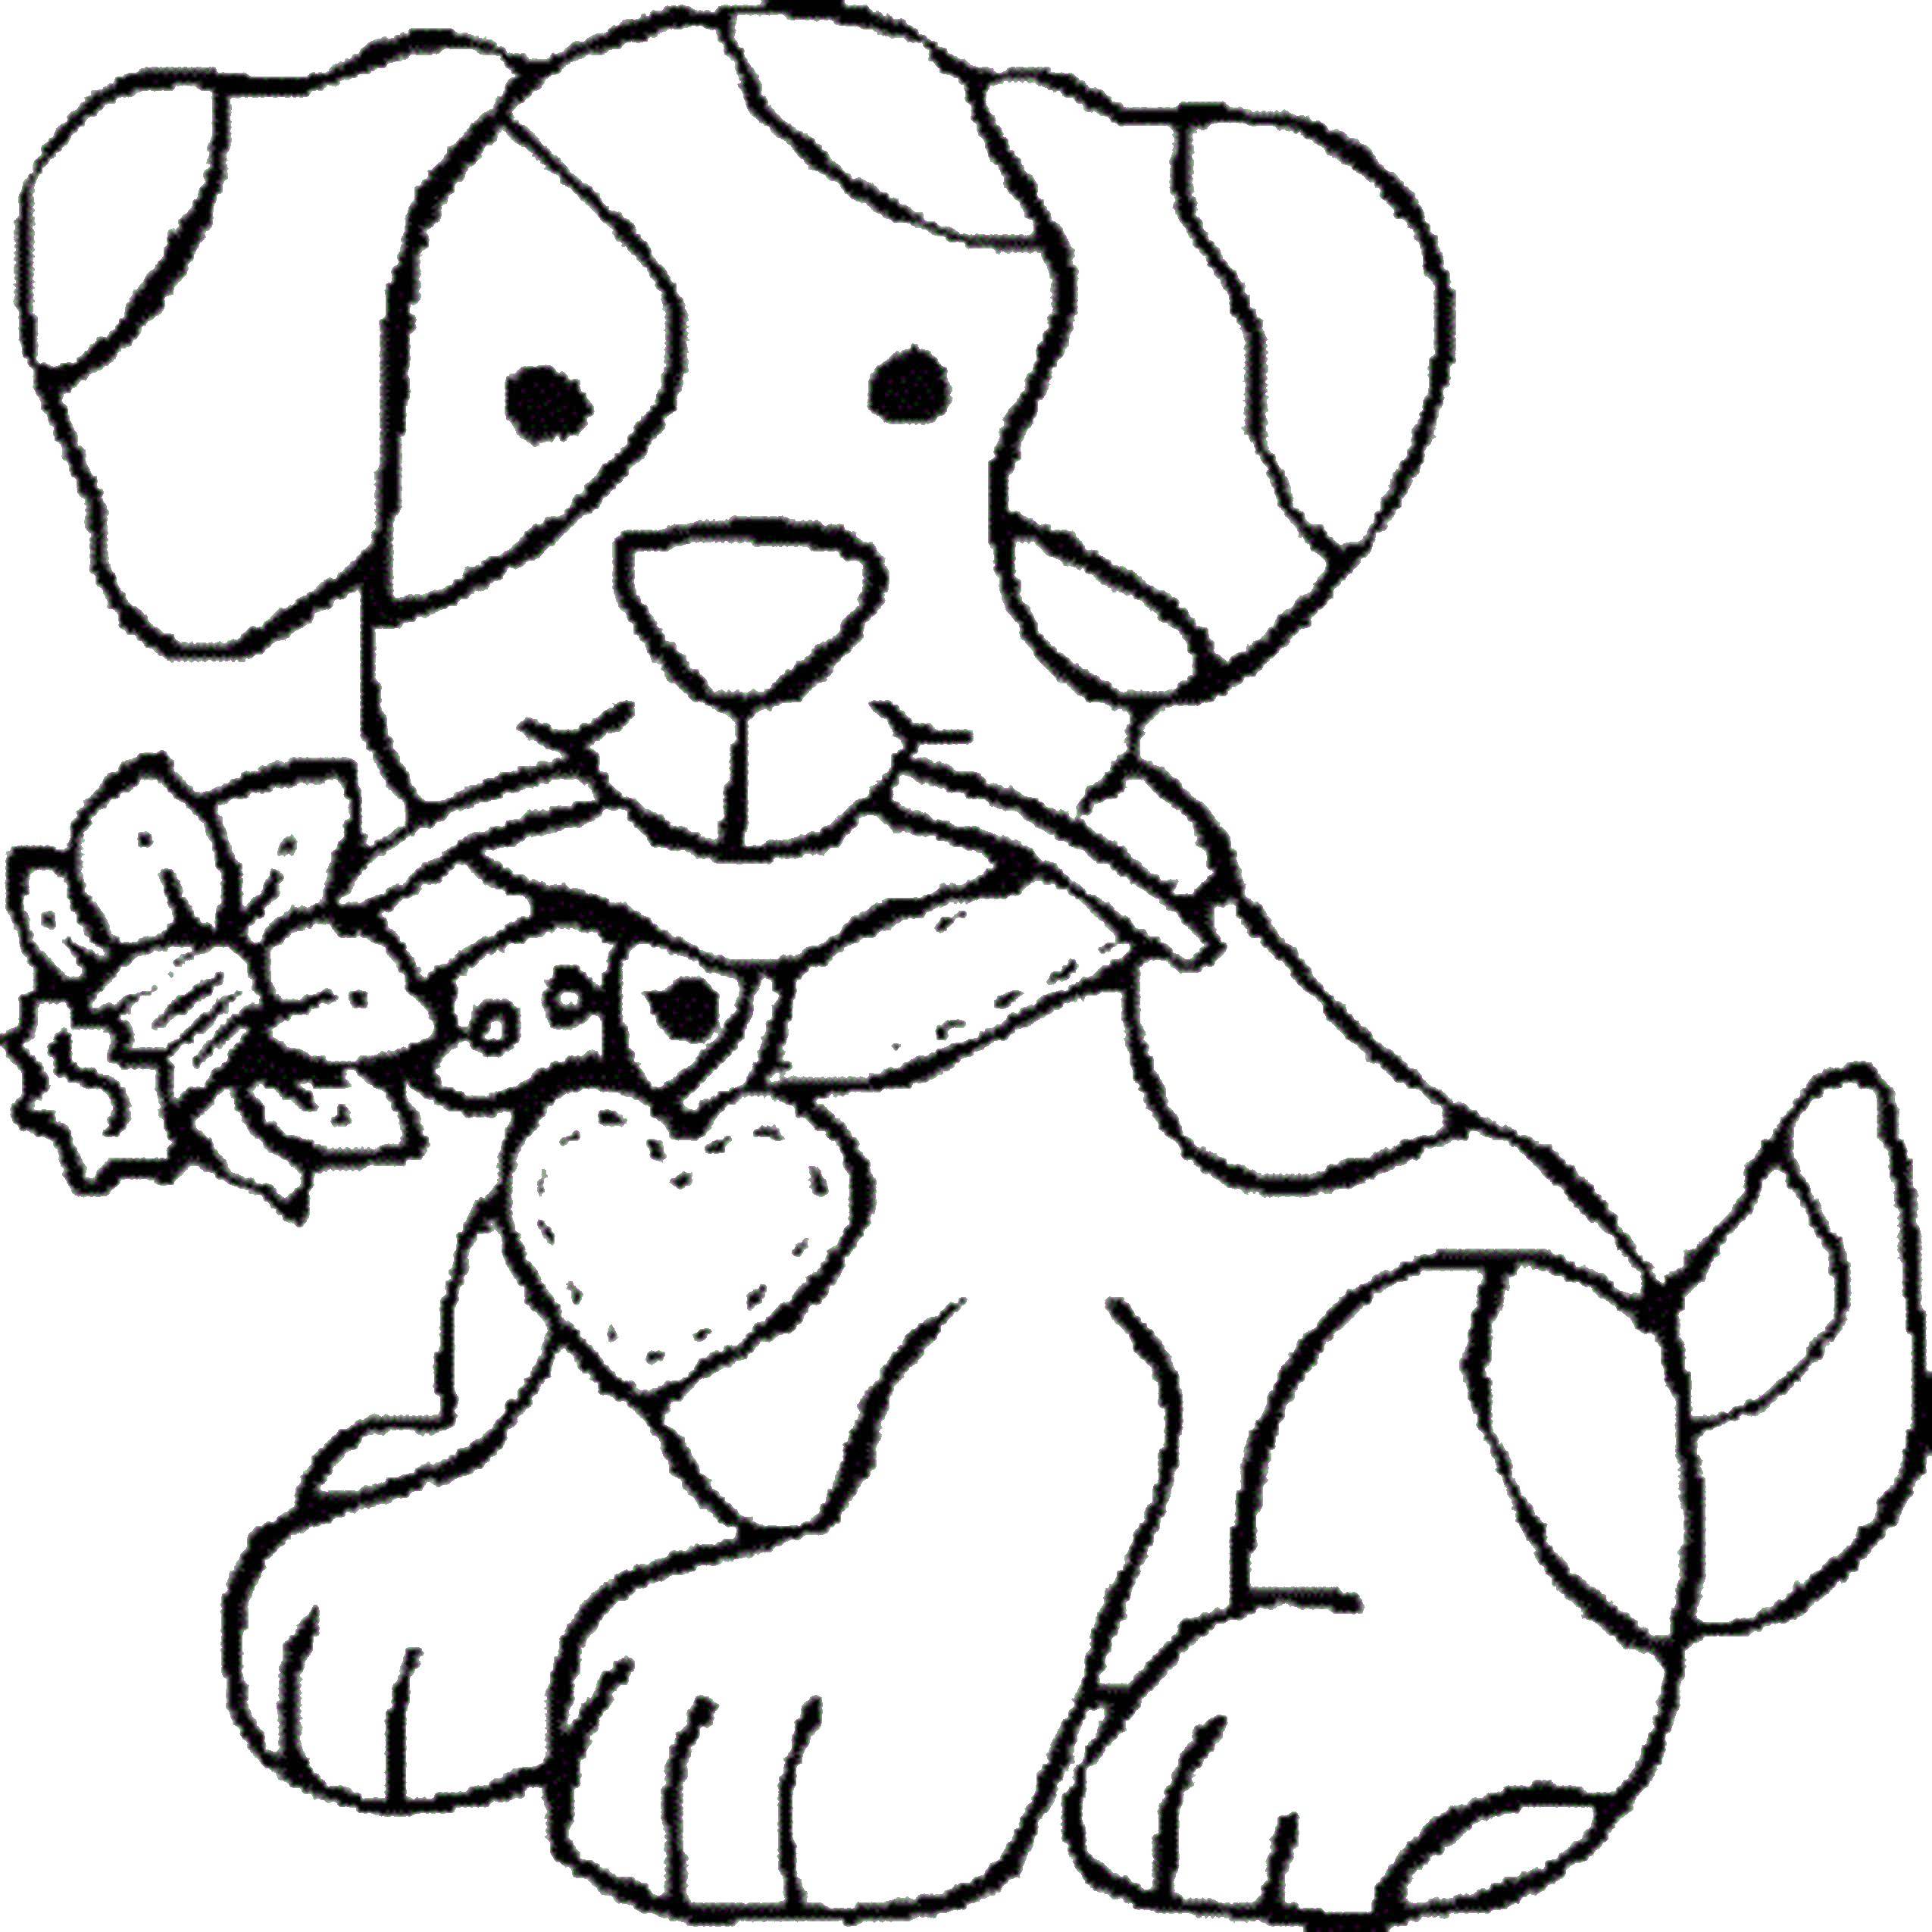 Coloring The puppy with Narcissa. Category dogs. Tags:  puppy .